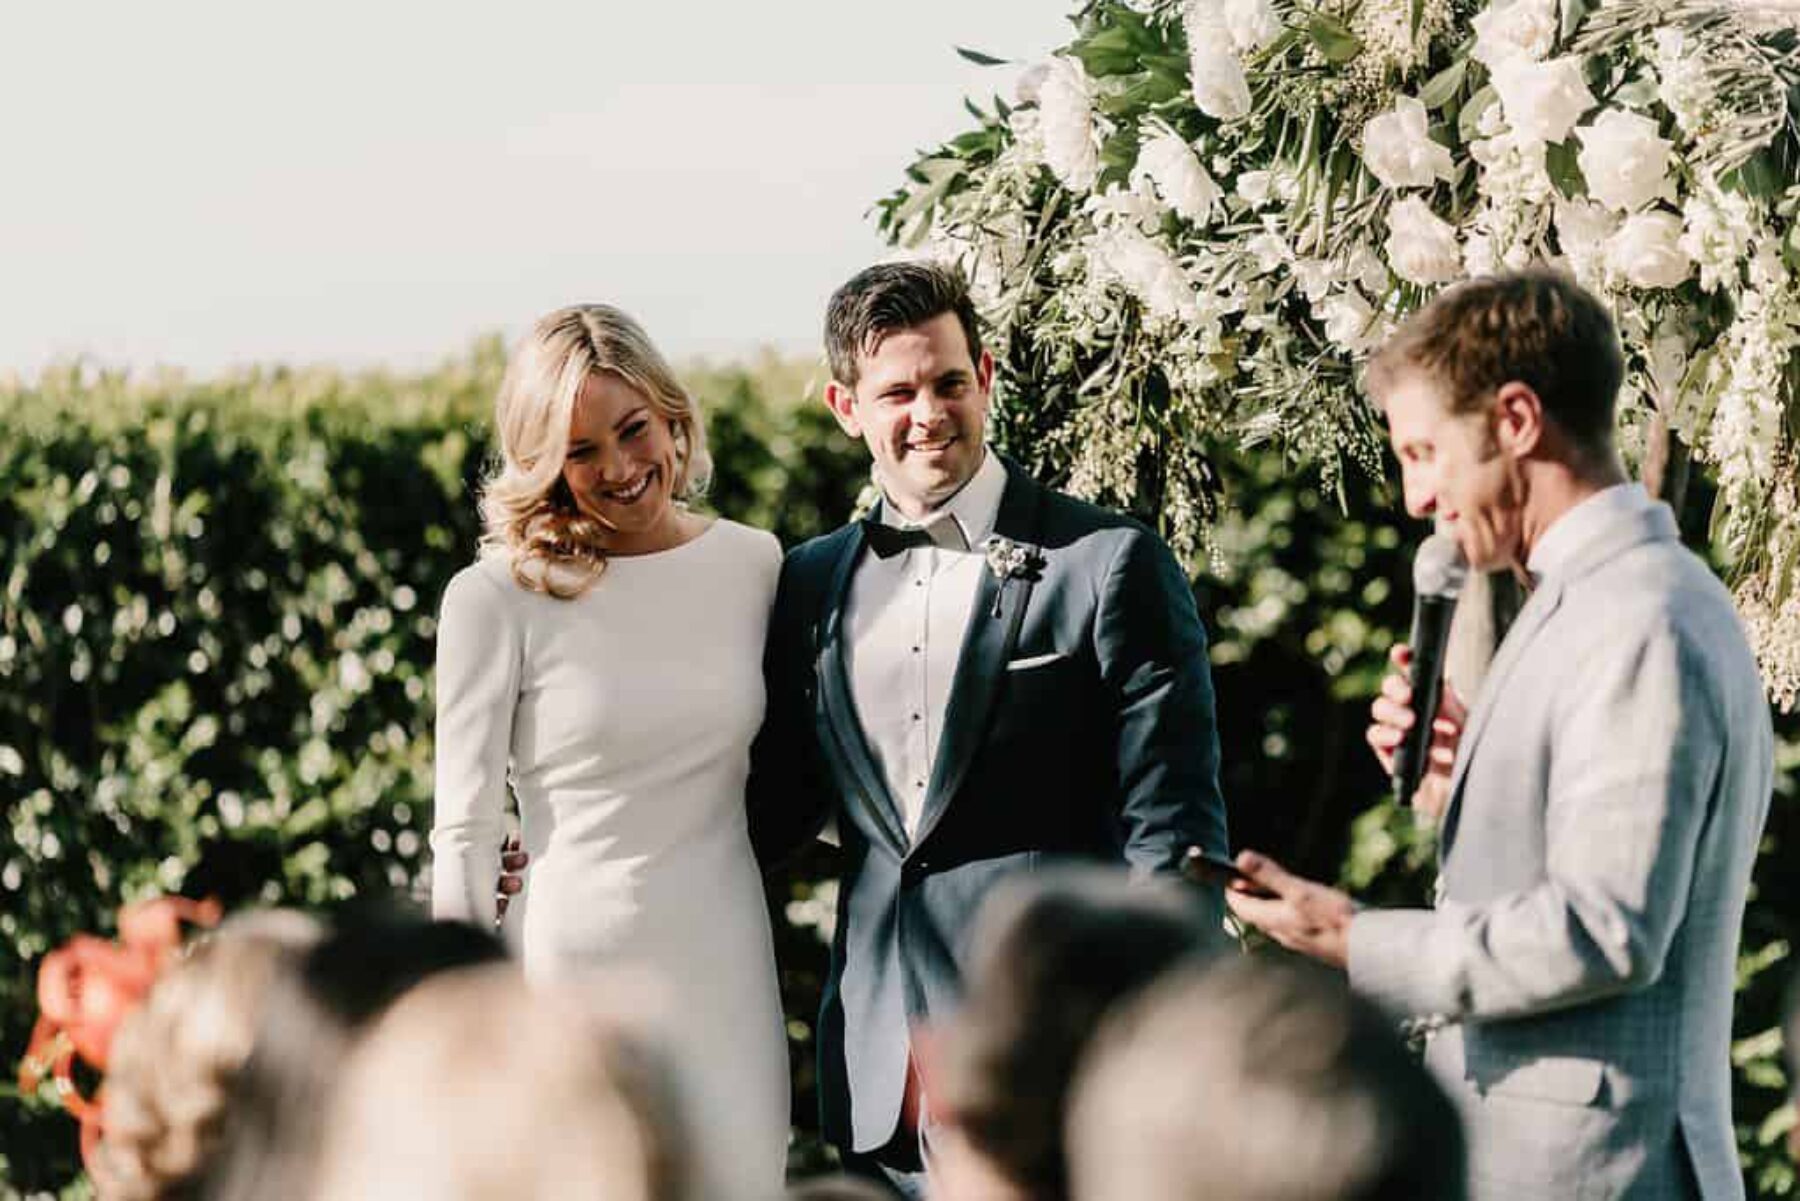 Relaxed Byron Bay wedding at Fig Tree Restaurant - Zoe Morley Photography